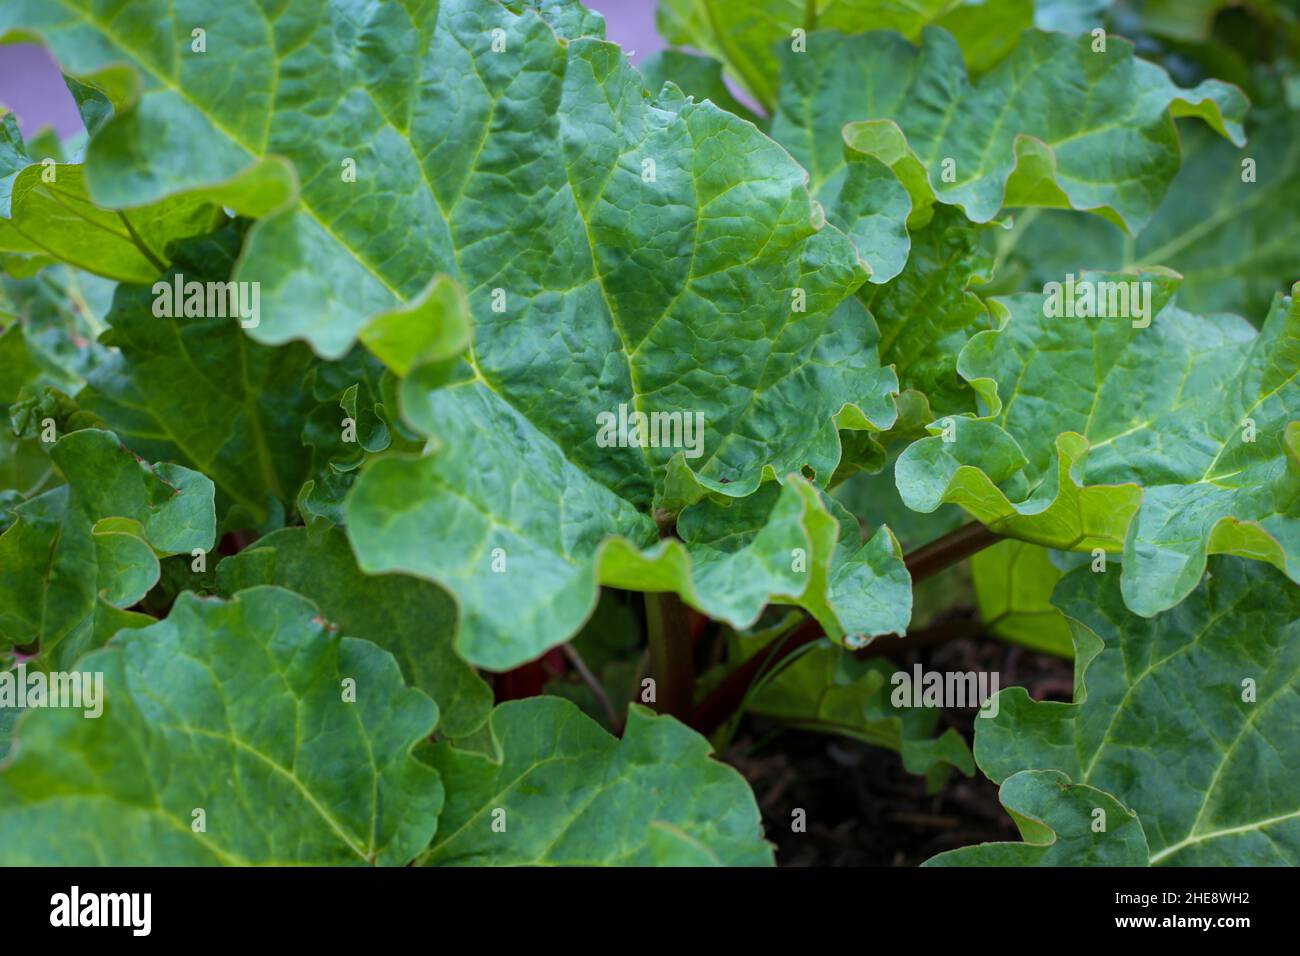 A healthy rhubarb plant growing in an organic garden showing the vibrant green leaves that are poisonous to eat. Stock Photo